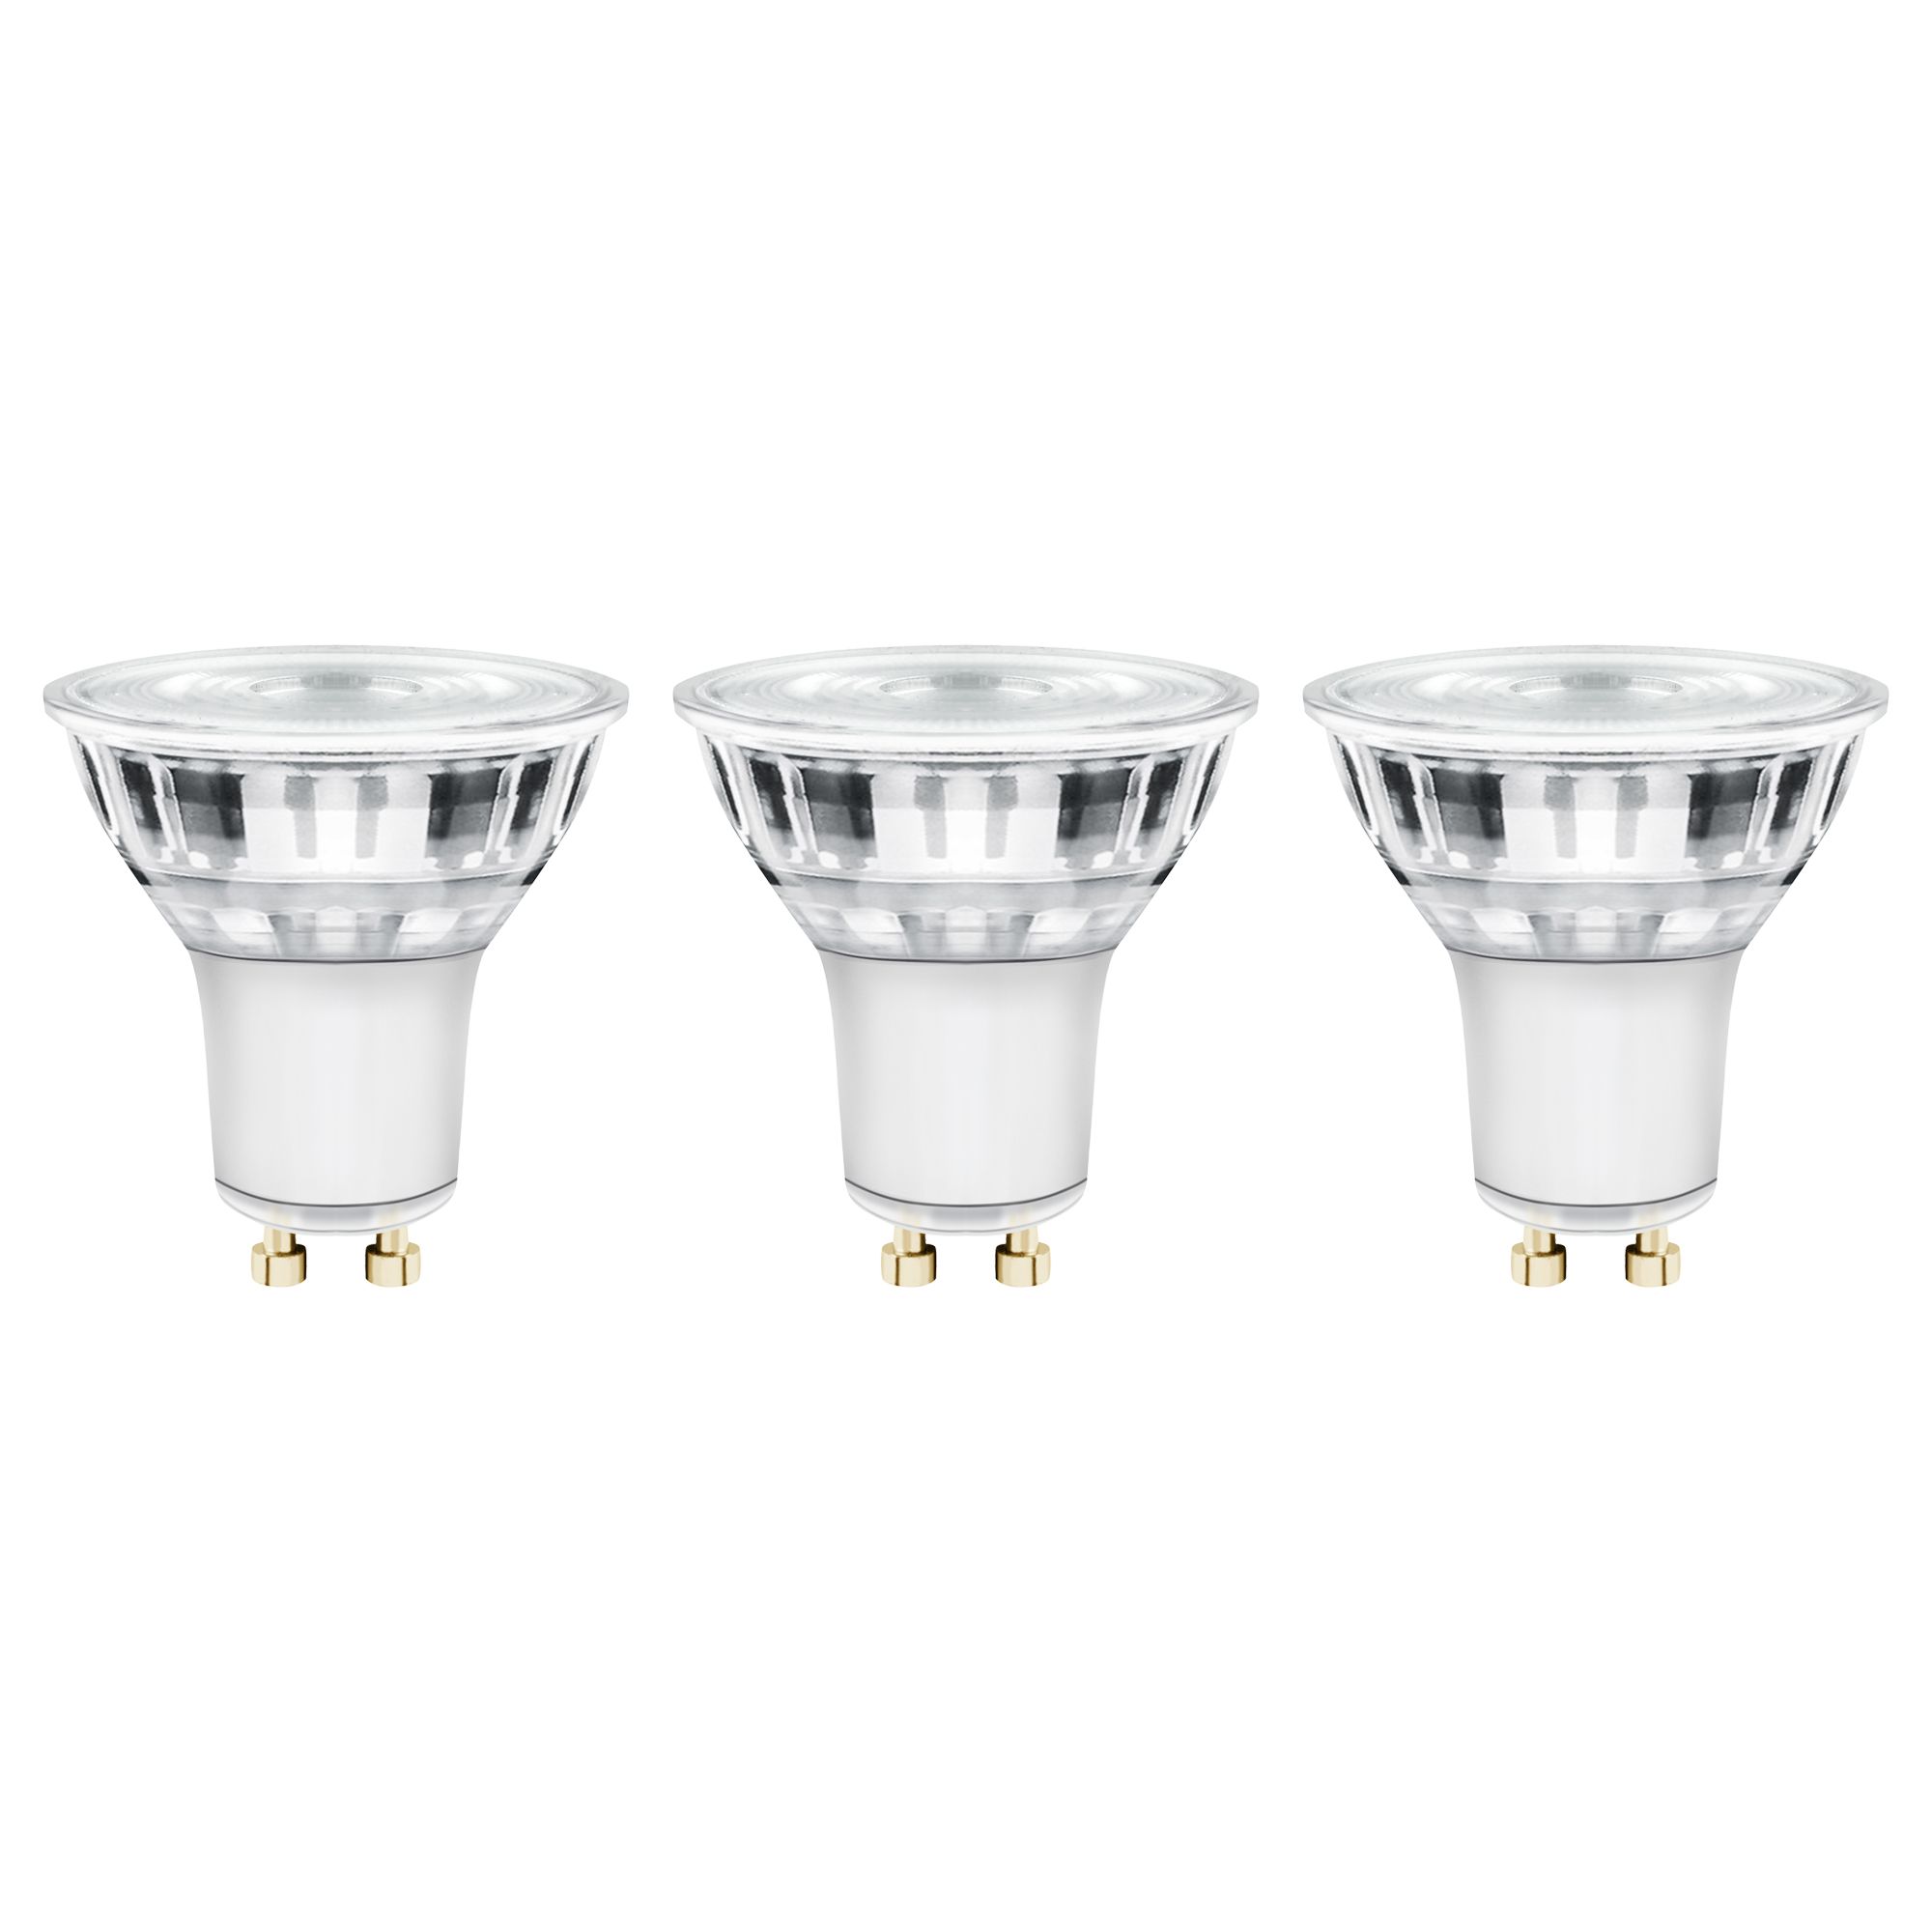 Pack Warm white | DIY at Dimmable of 4.5W Diall bulb, Reflector B&Q 3 Light LED GU10 345lm